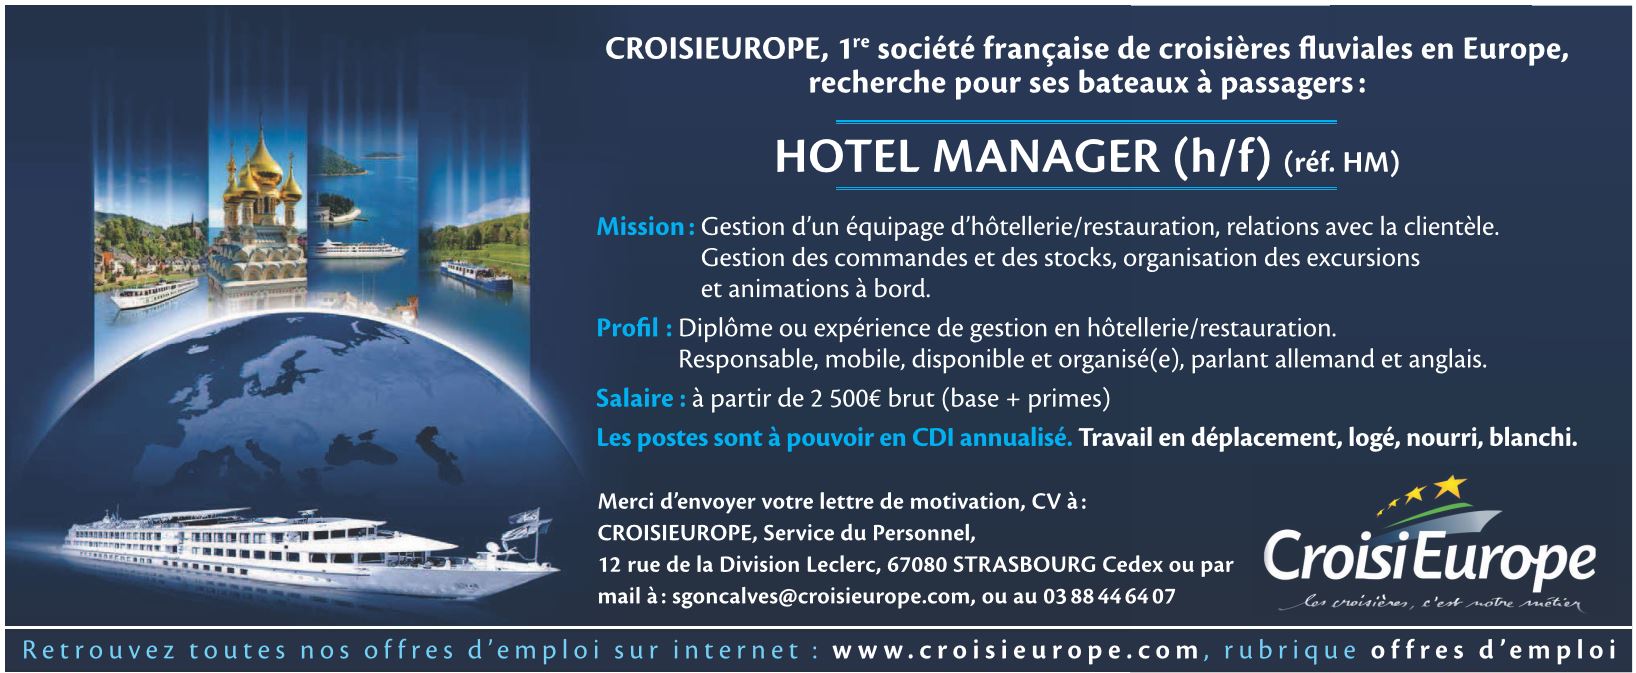 CROISIEUROPE recrute HOTEL MANAGER